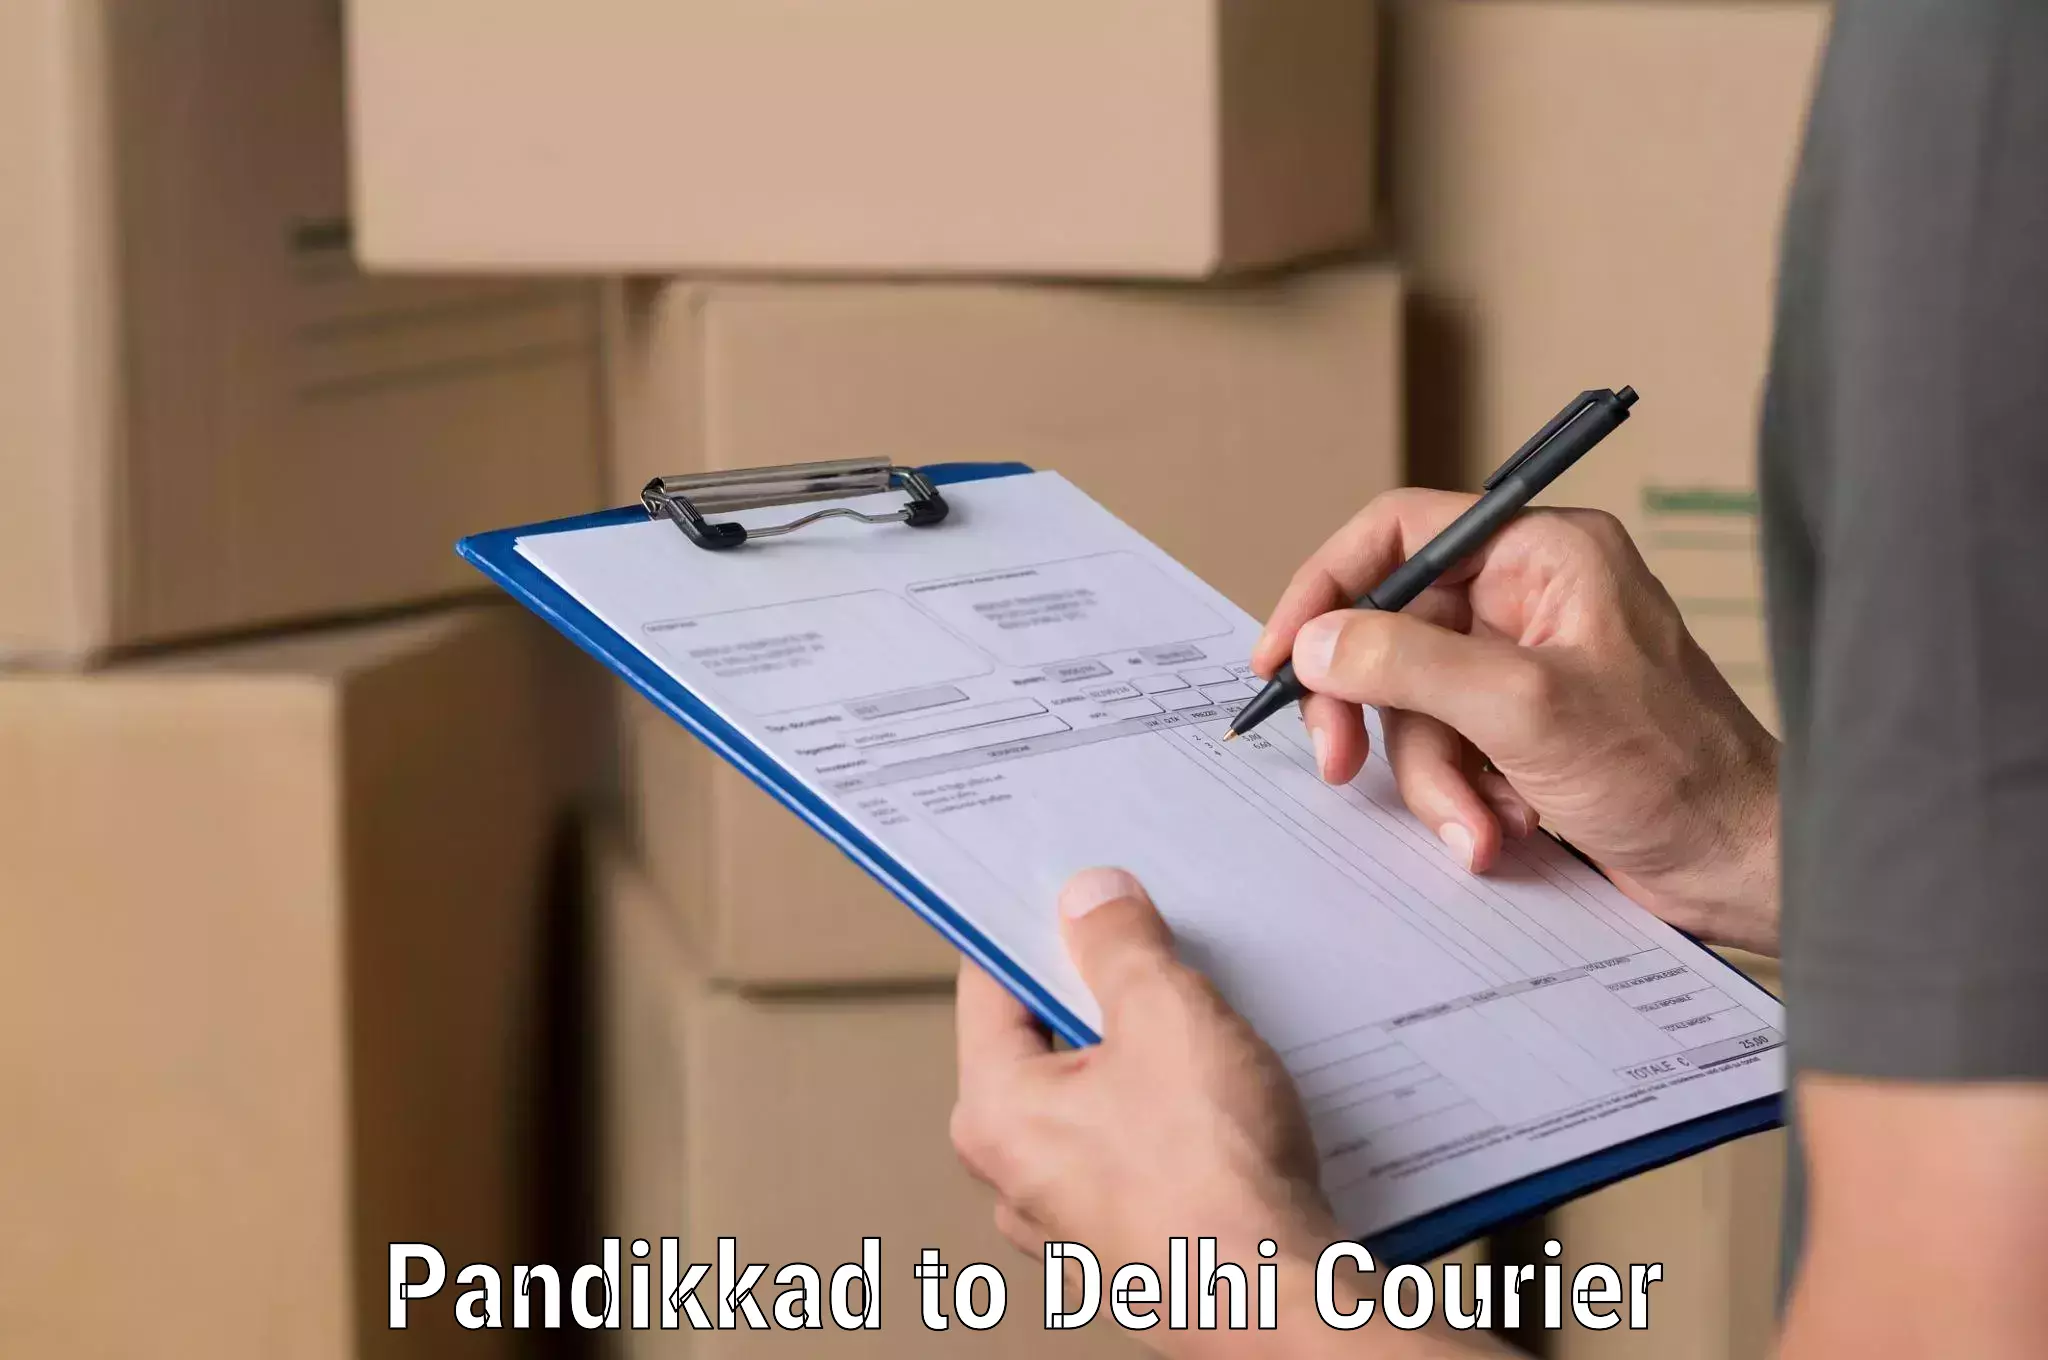 Express delivery solutions Pandikkad to Delhi Technological University DTU